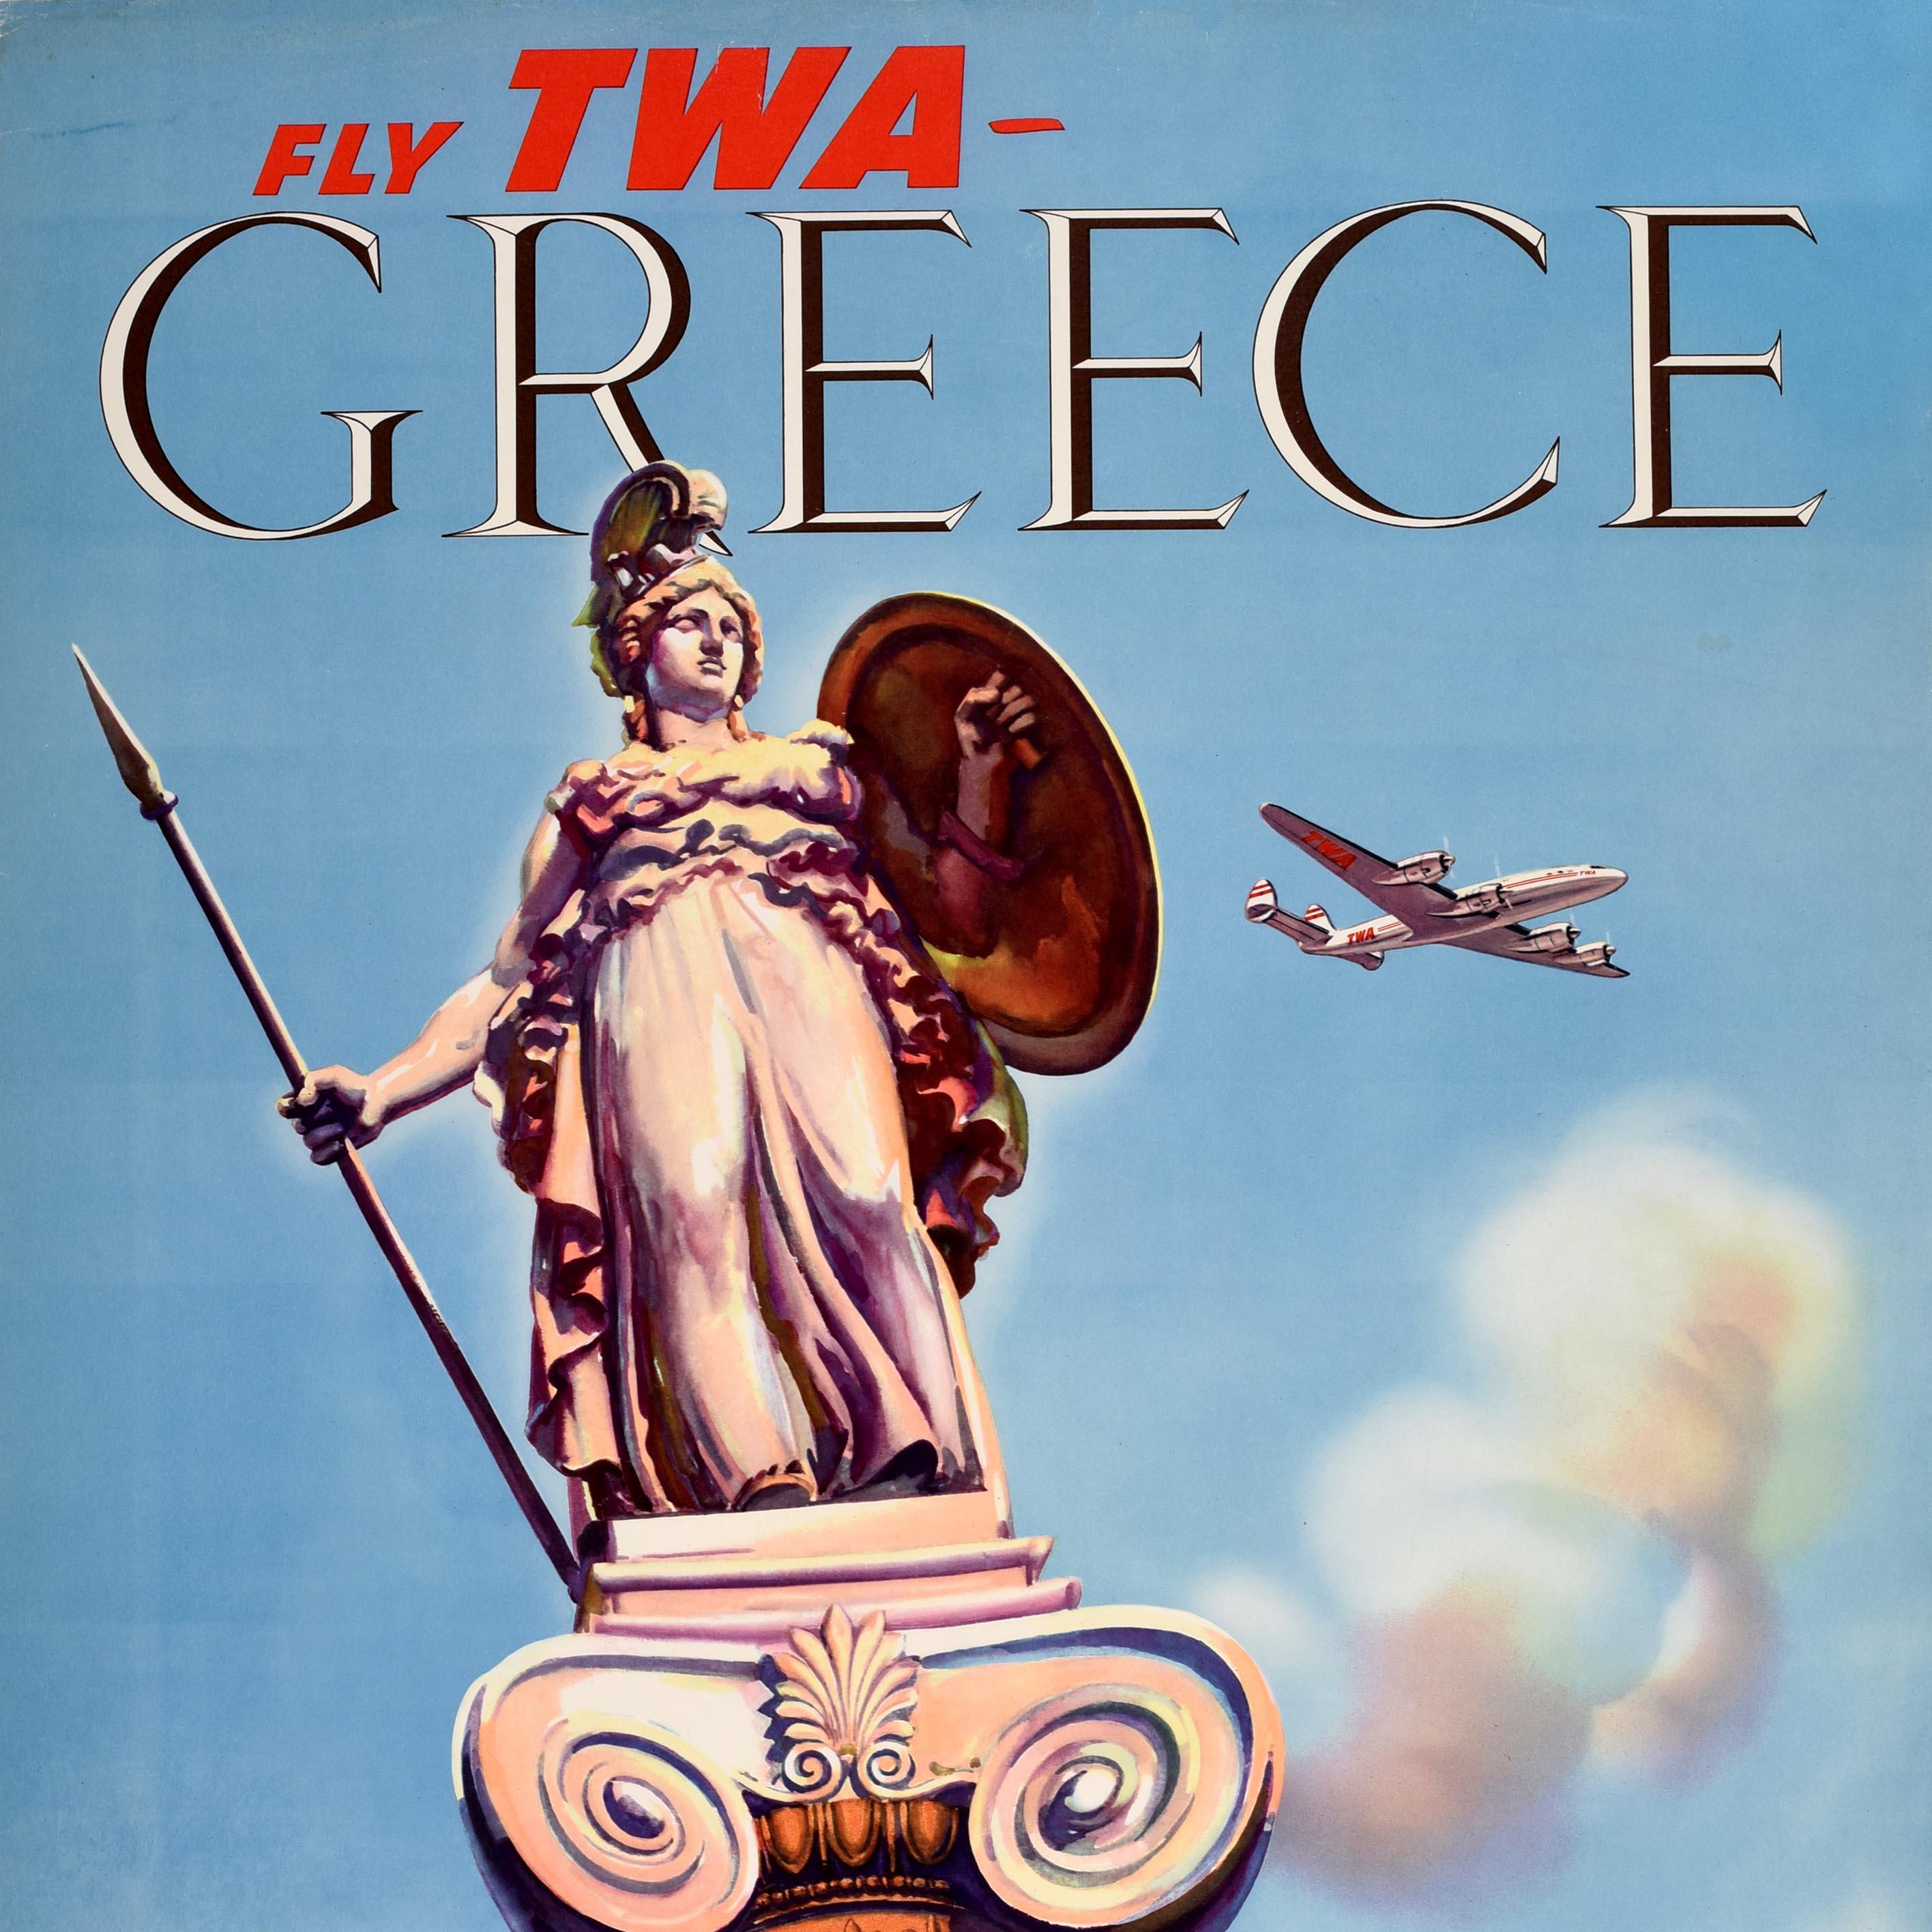 Original Vintage Travel Poster Greece Fly TWA Airlines Lockheed Constellation - Blue Print by Unknown